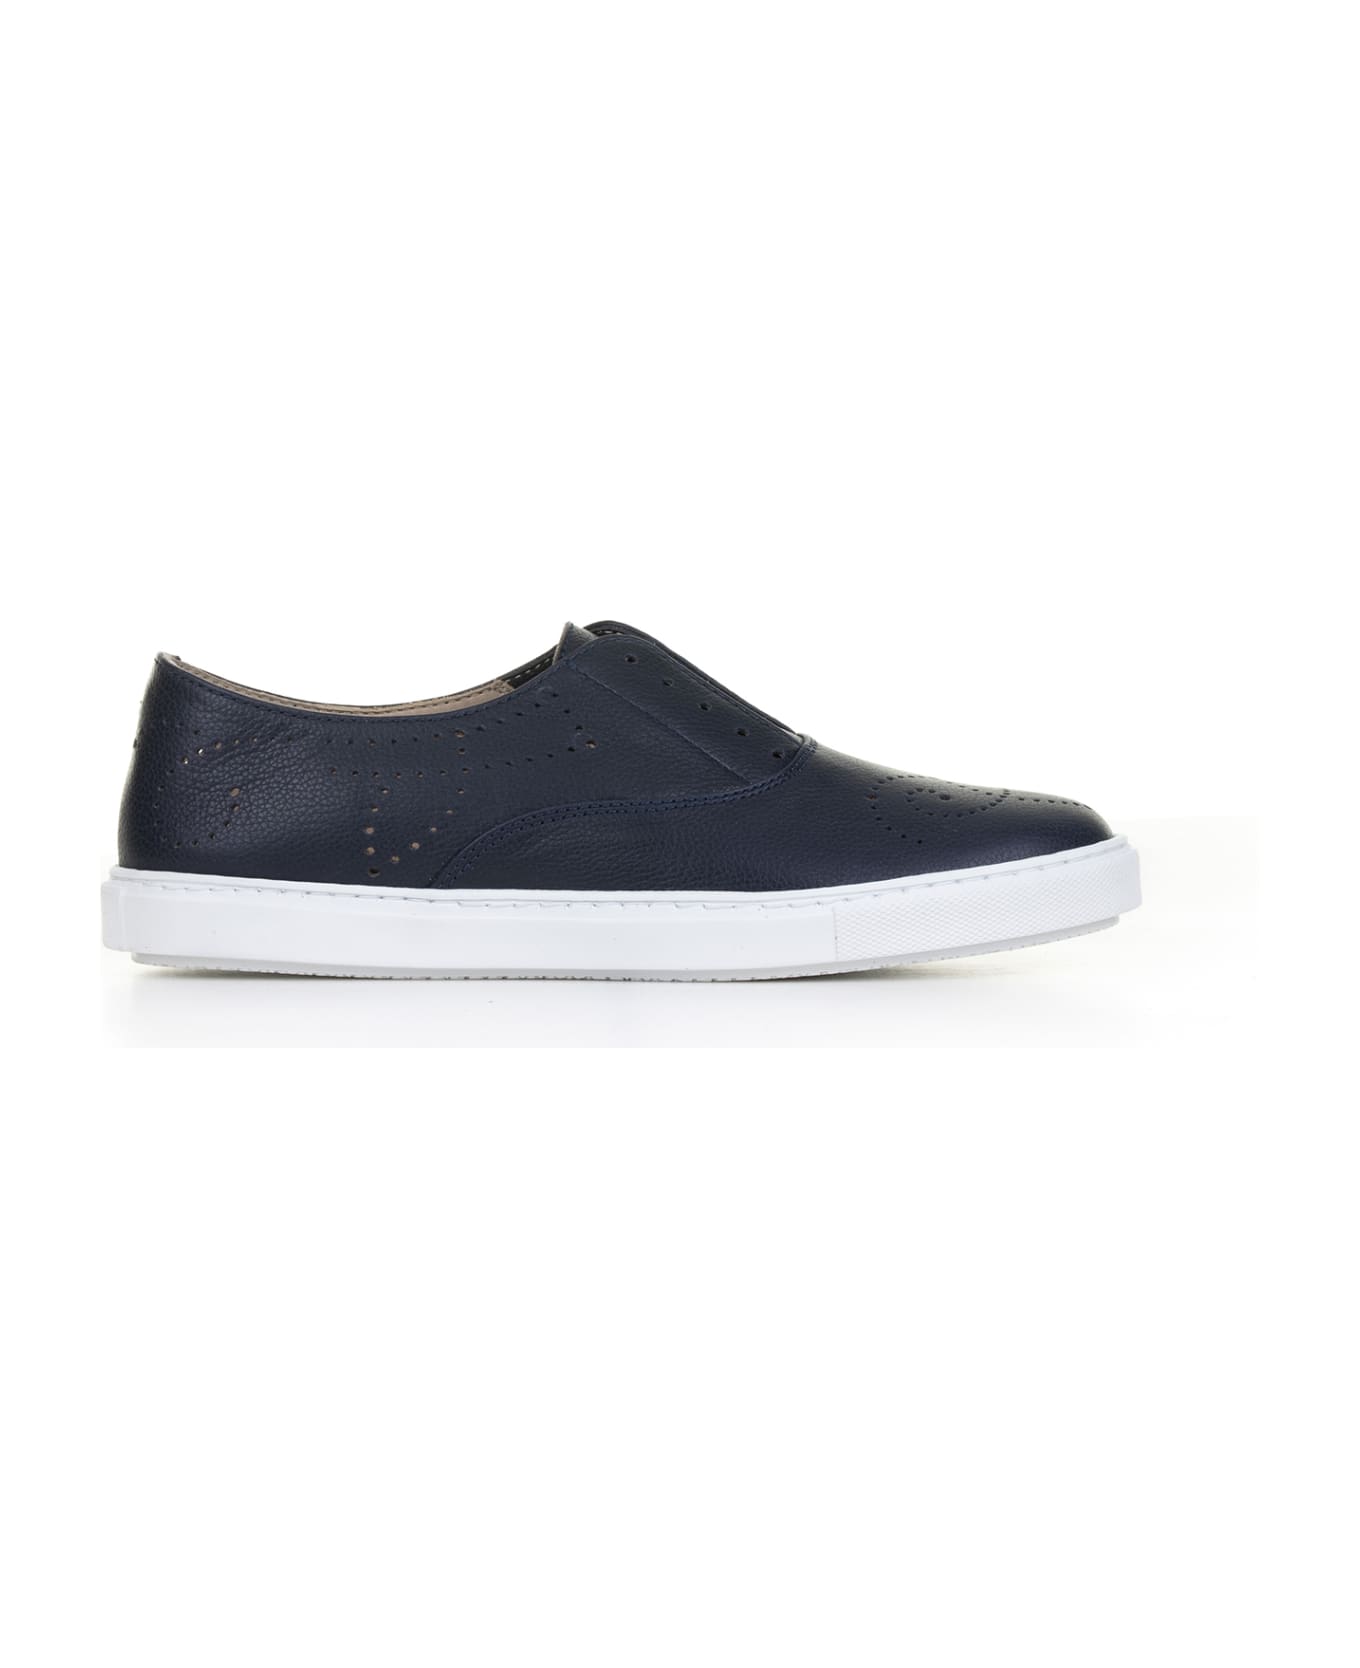 Fratelli Rossetti One Navy Blue Leather Slip-on Sneakers - NAVY